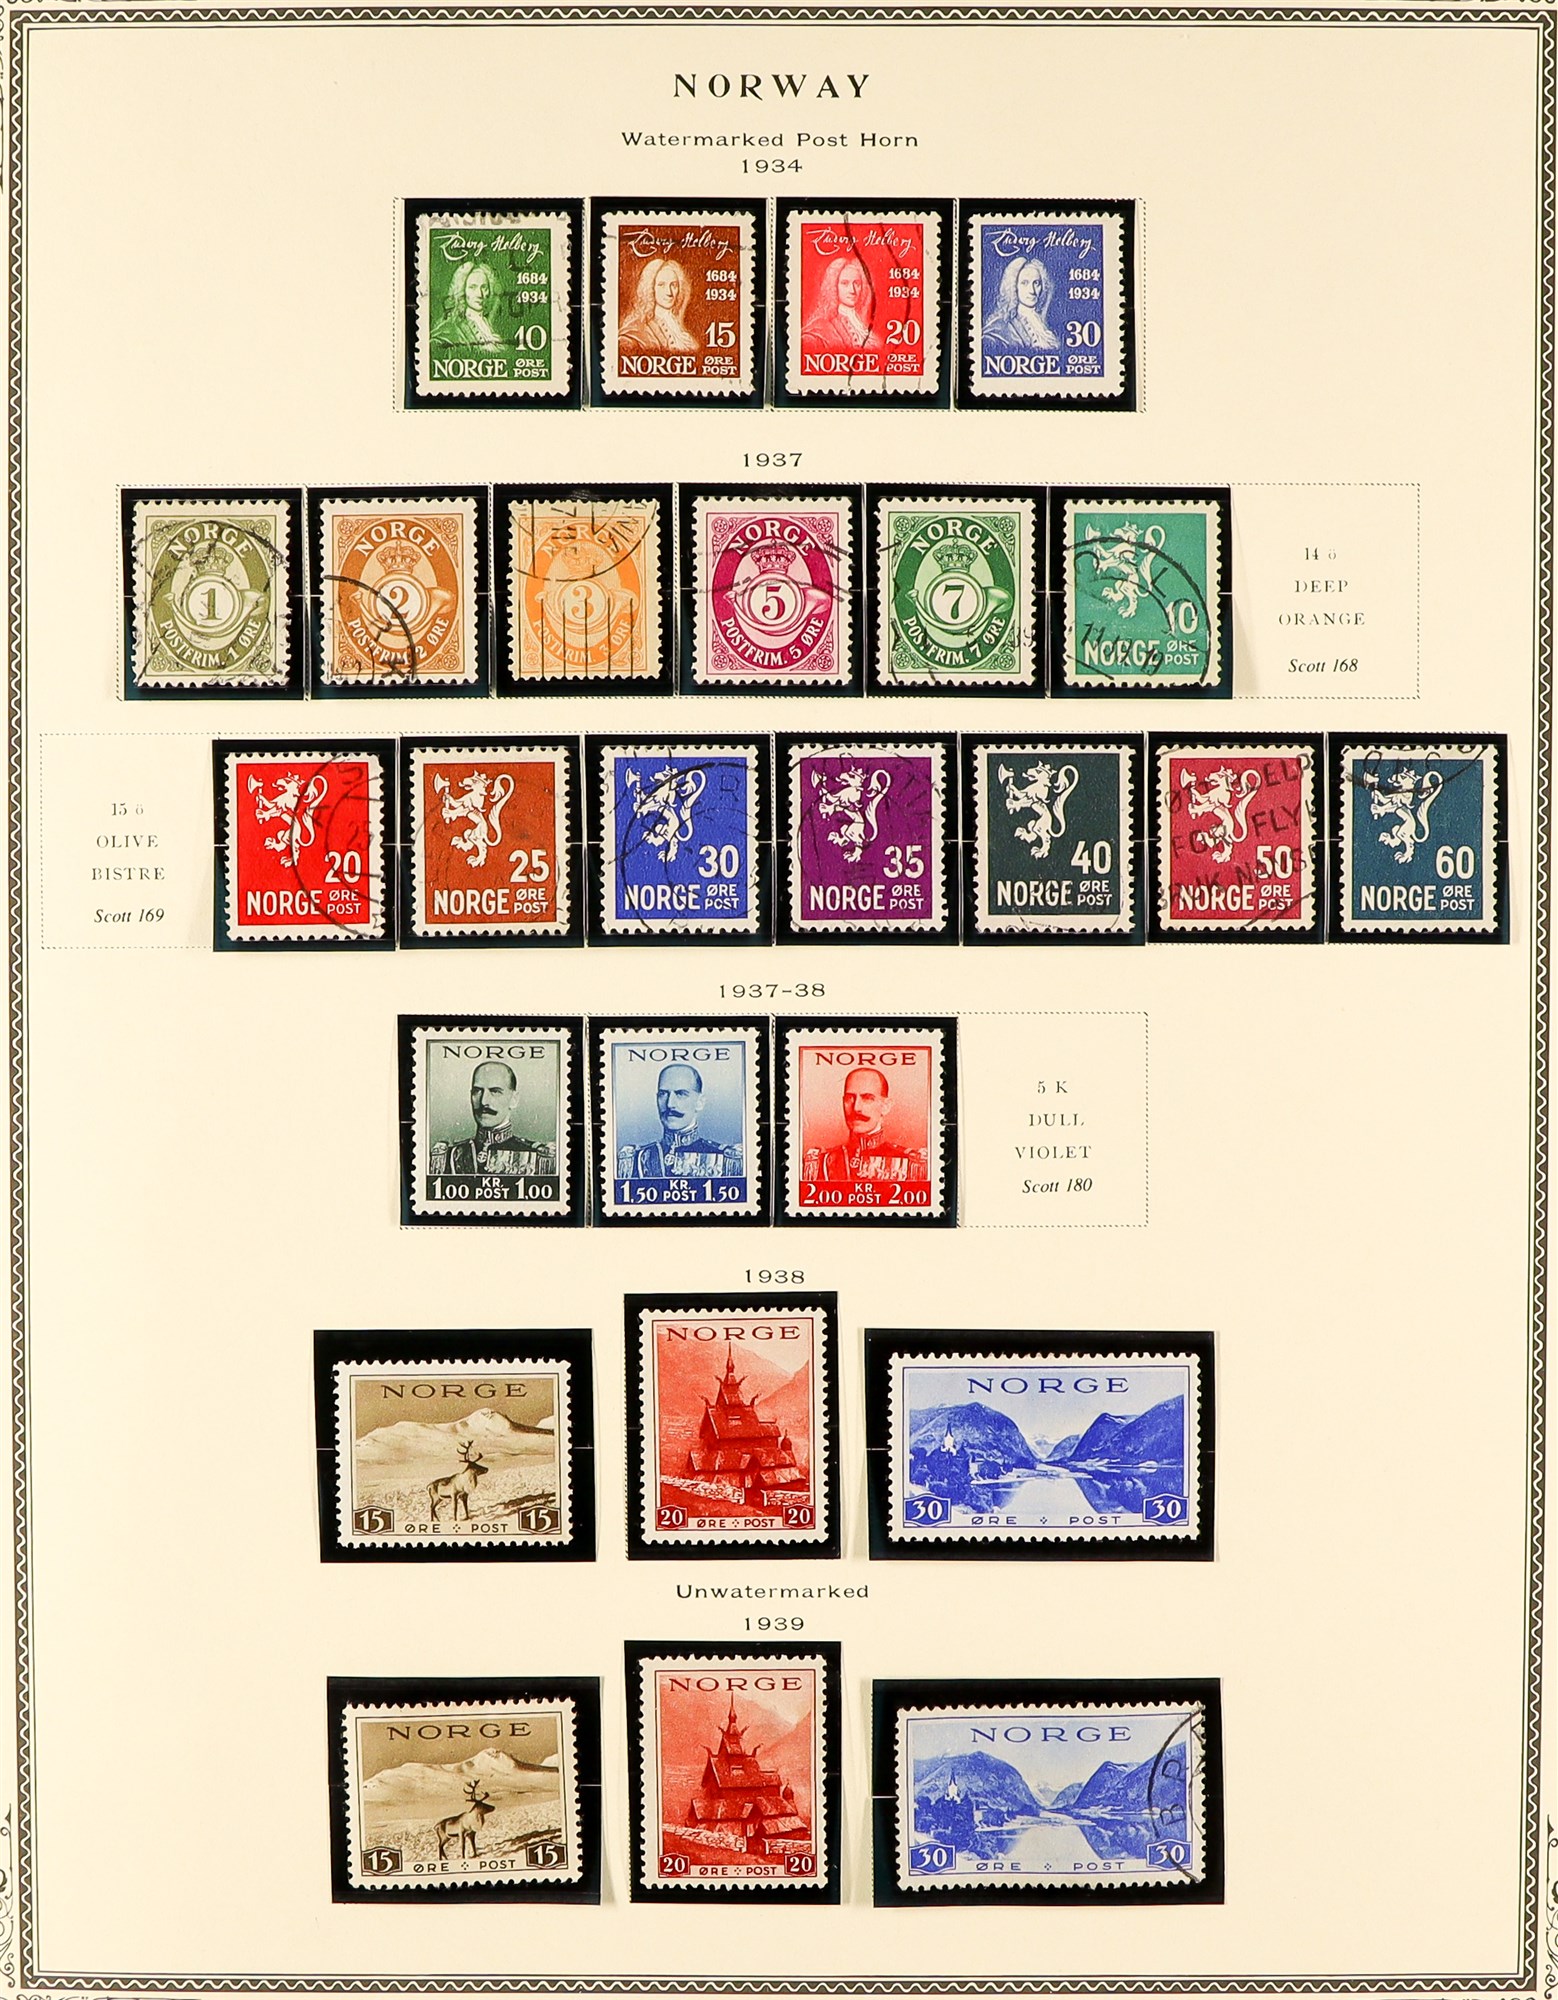 NORWAY 1855 - 1988 COLLECTION of stamps in Scott Specialty album (pages to 2002) of mint / never - Image 7 of 16